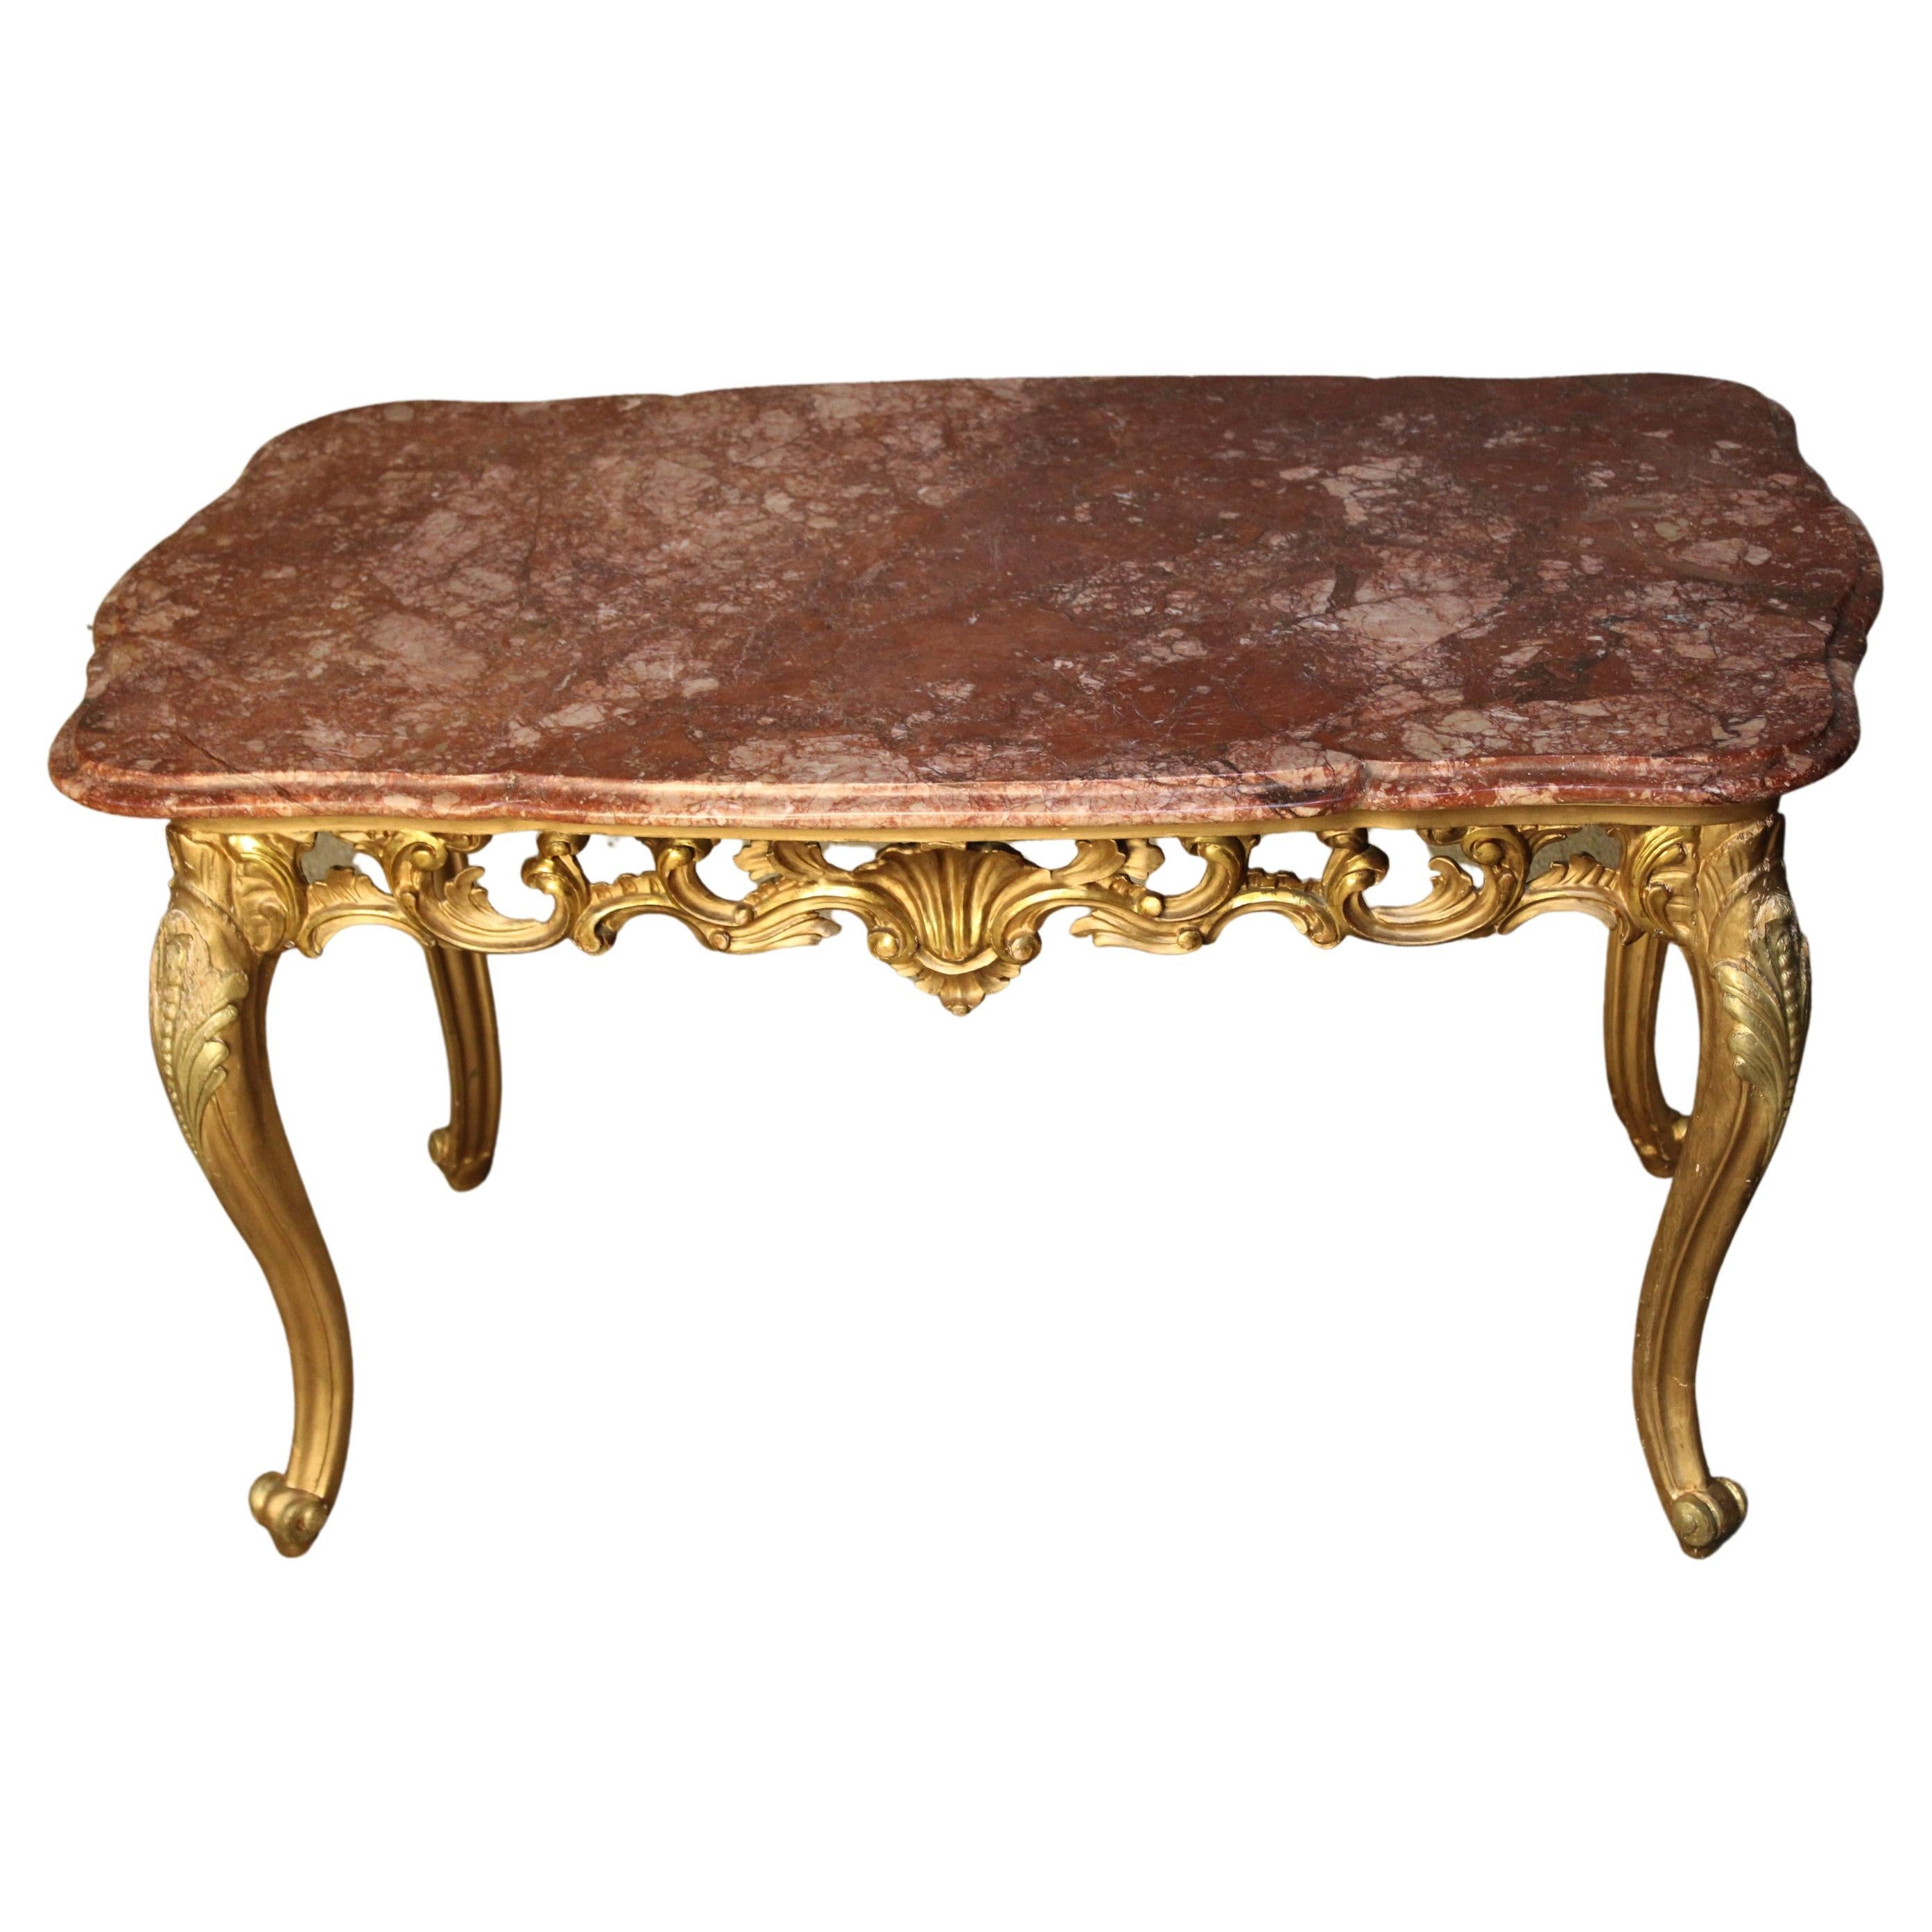  Italian Gilded wood Center Table with Marble Top For Sale